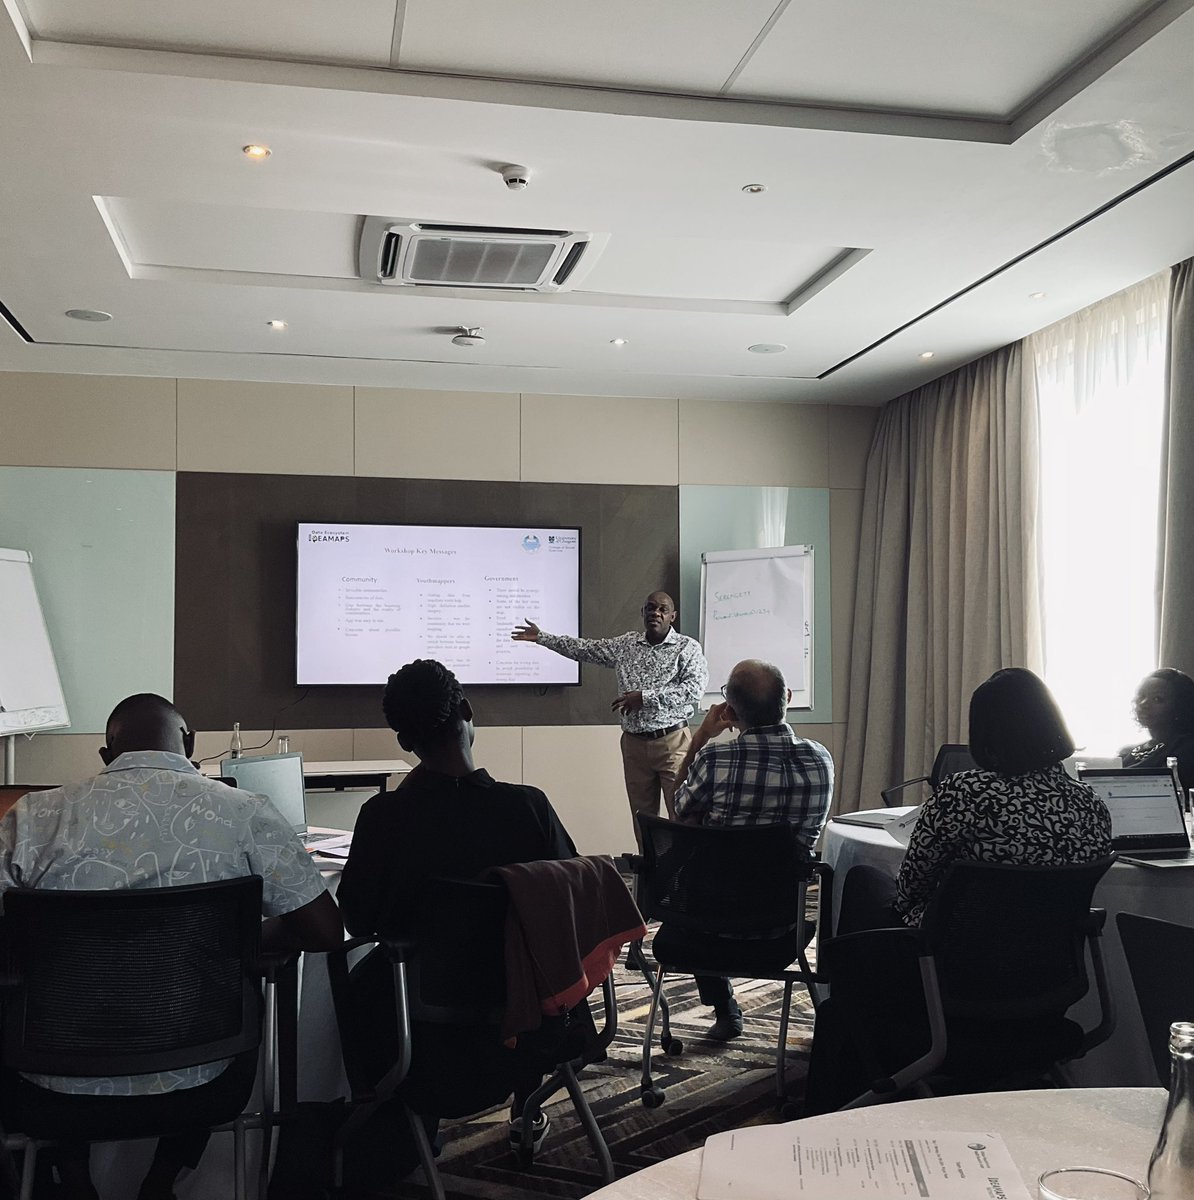 📍IDEAMAPS team is in Nairobi! Starting off the week hearing from Dr. @peter_pelias about the recent cross-sectoral workshops in Kano and Lagos, Nigeria where participants completed validation activities on an initial version of the data ecosystem platform #participatorymapping